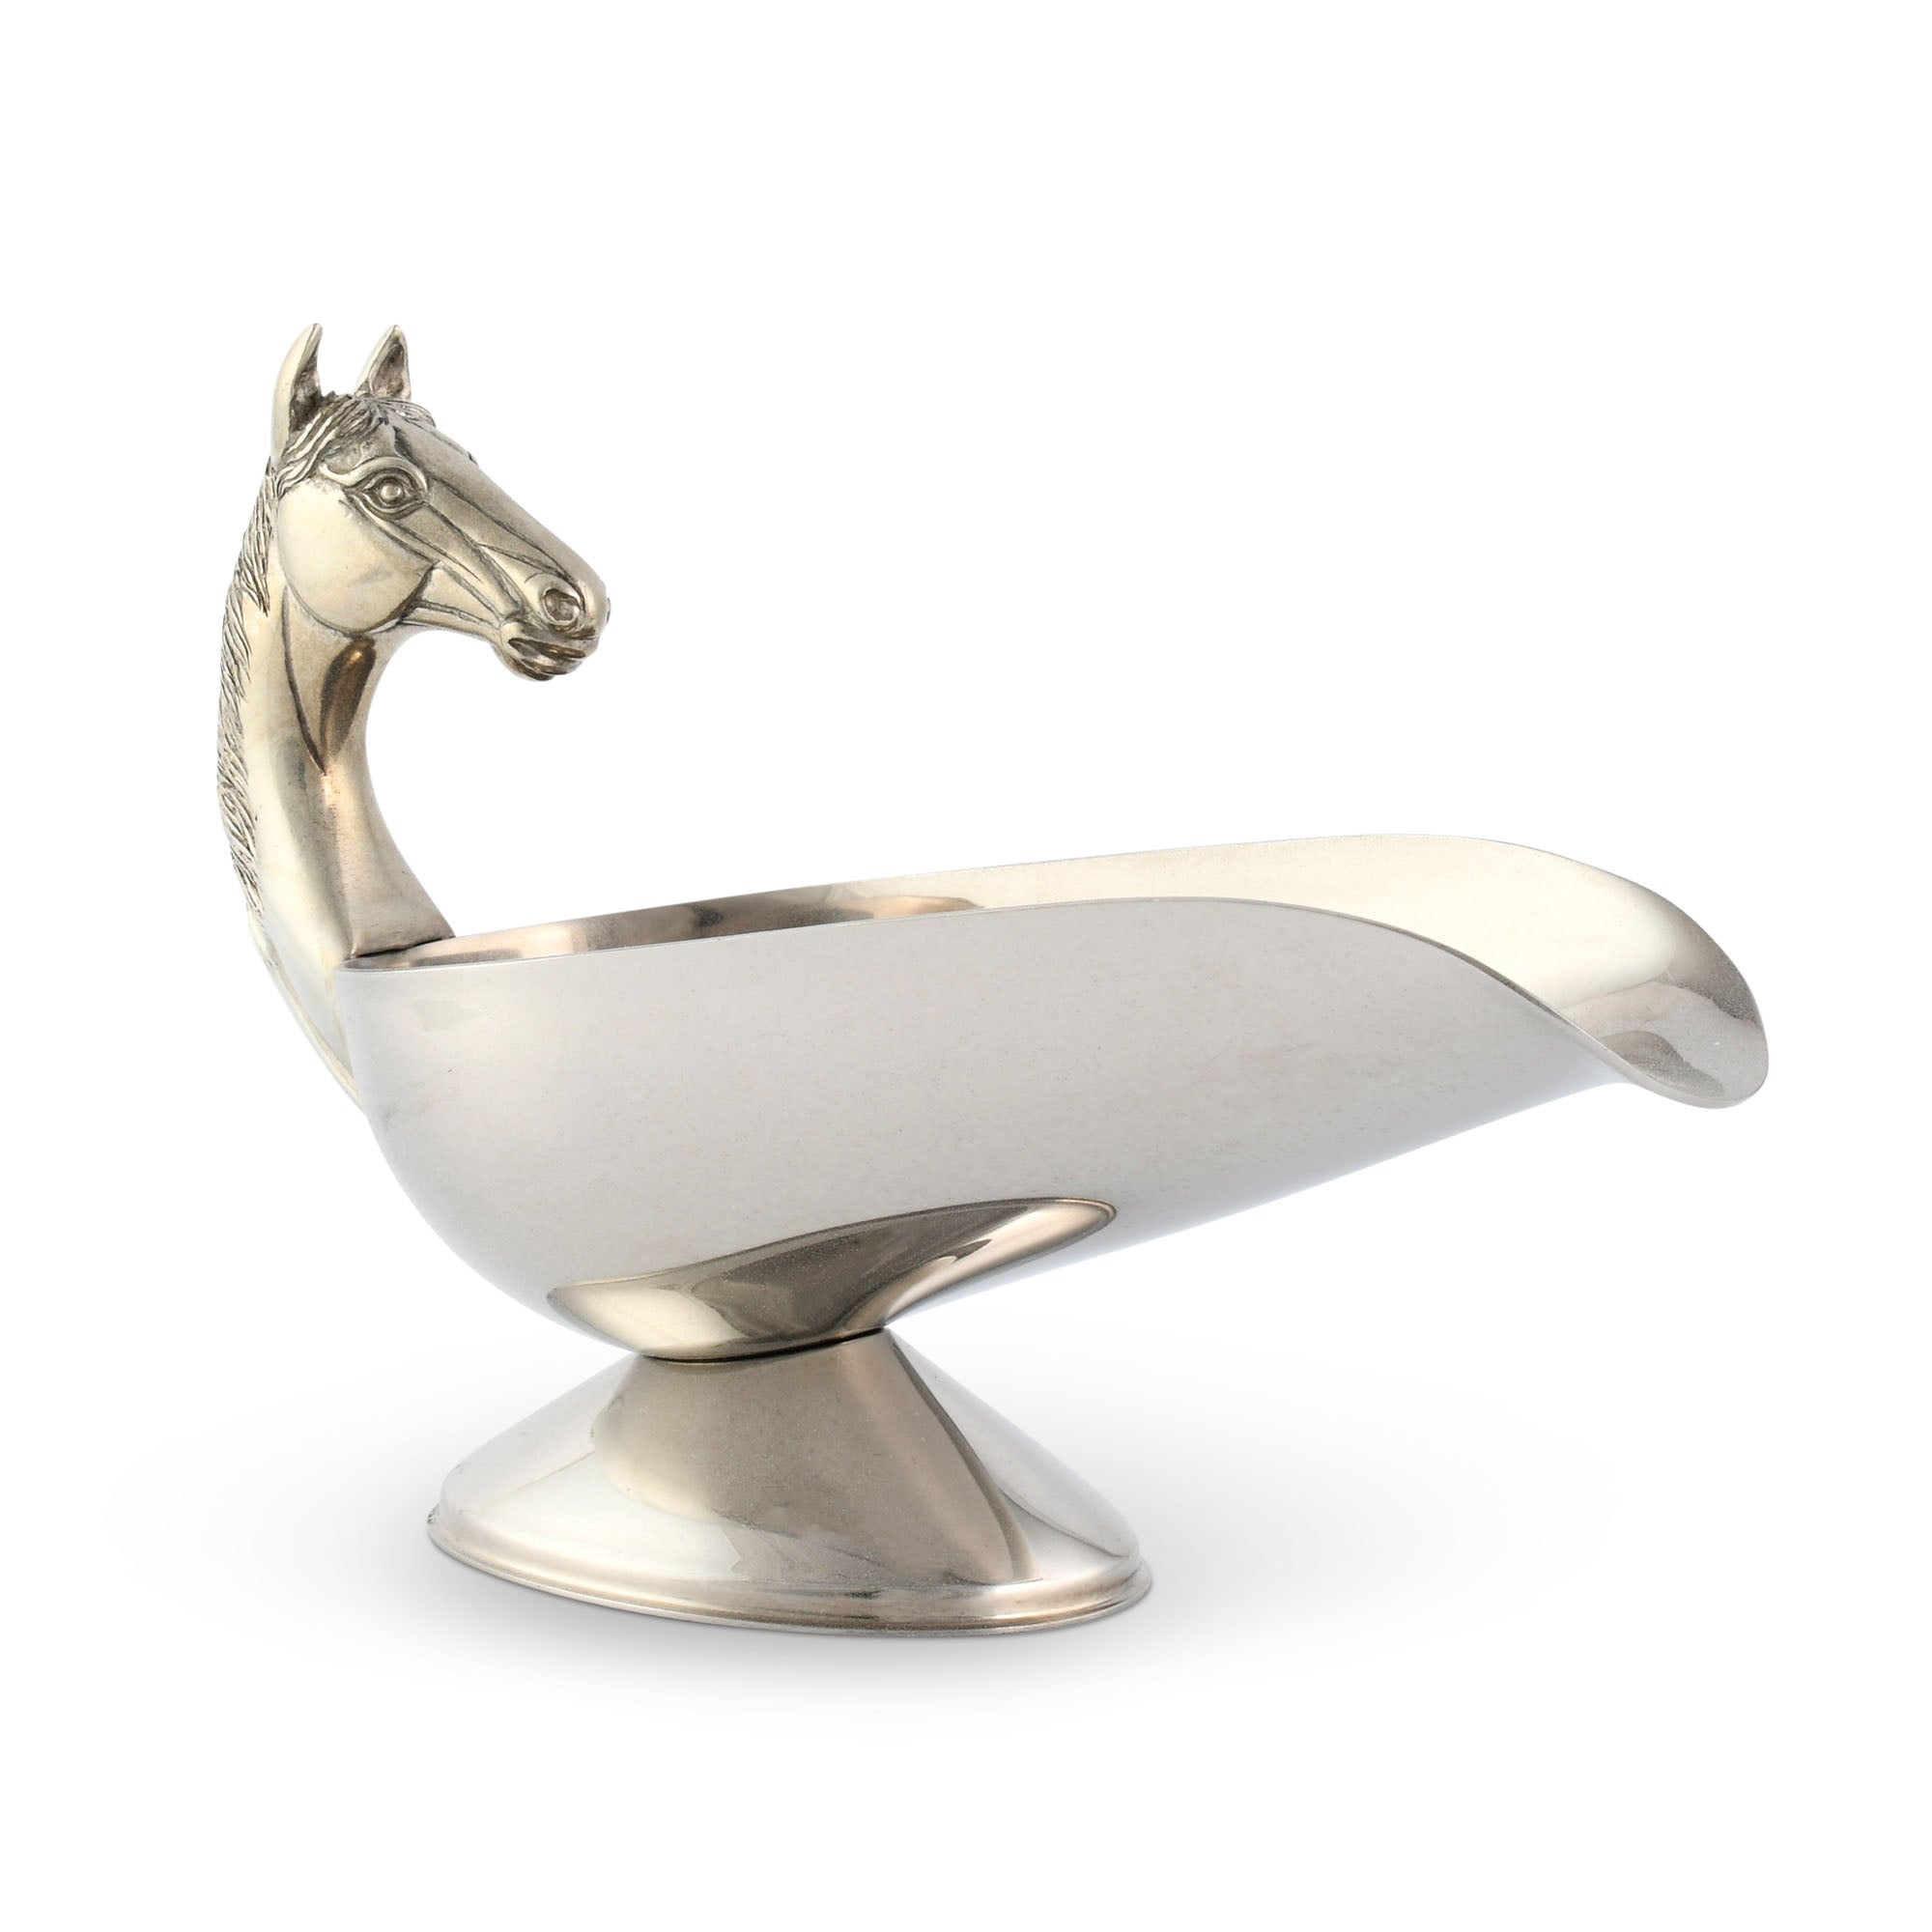 Vagabond House Horse Handle Stainless Steel Gravy / Sauce Server Product Image